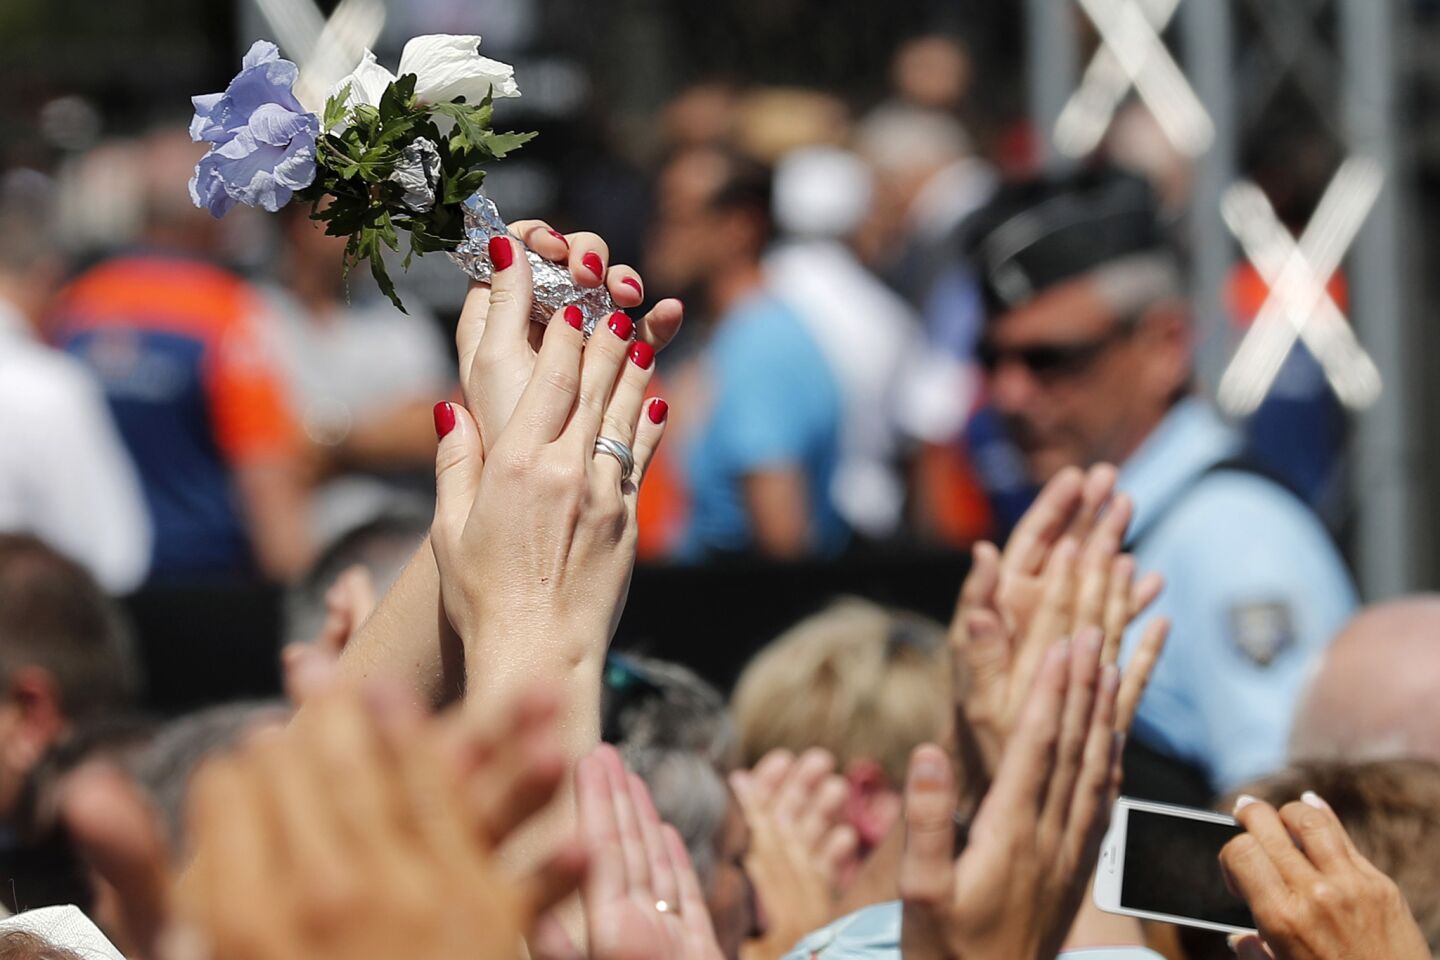 The crowd applauds police officers and rescue teams after a minute of silence on the famed Promenade des Anglais in Nice.